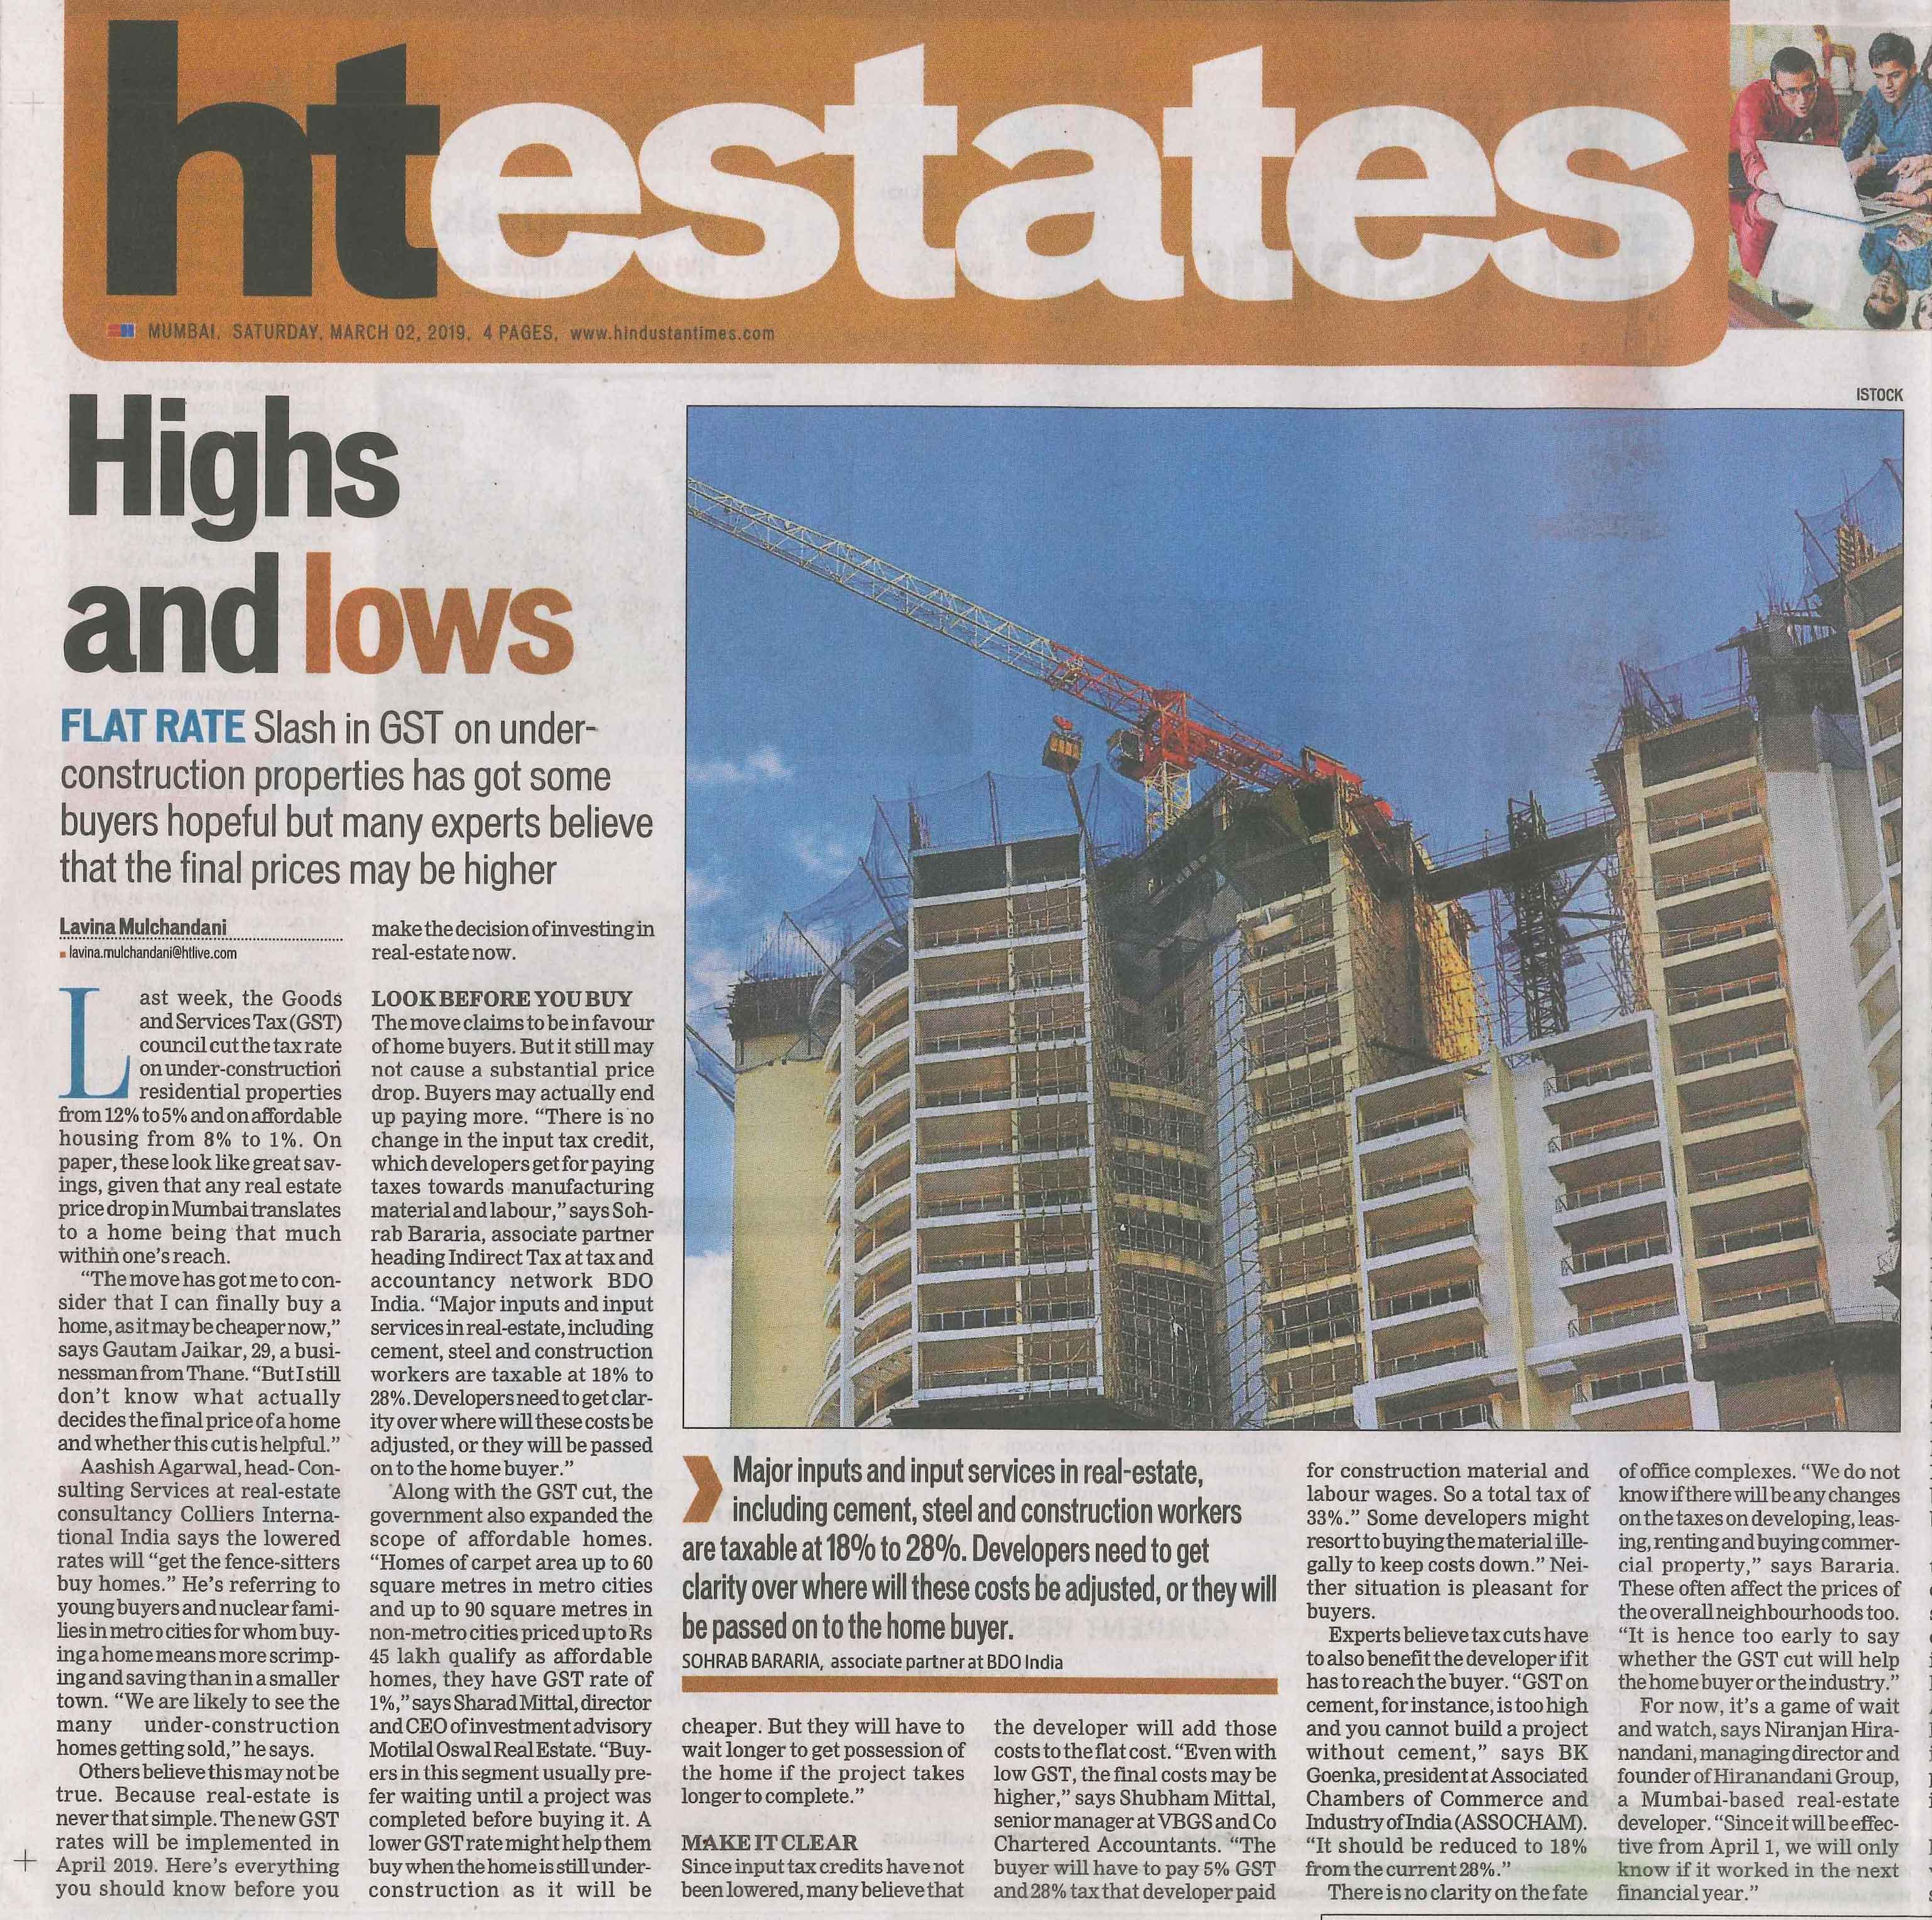 Highs and Lows - HT Estates